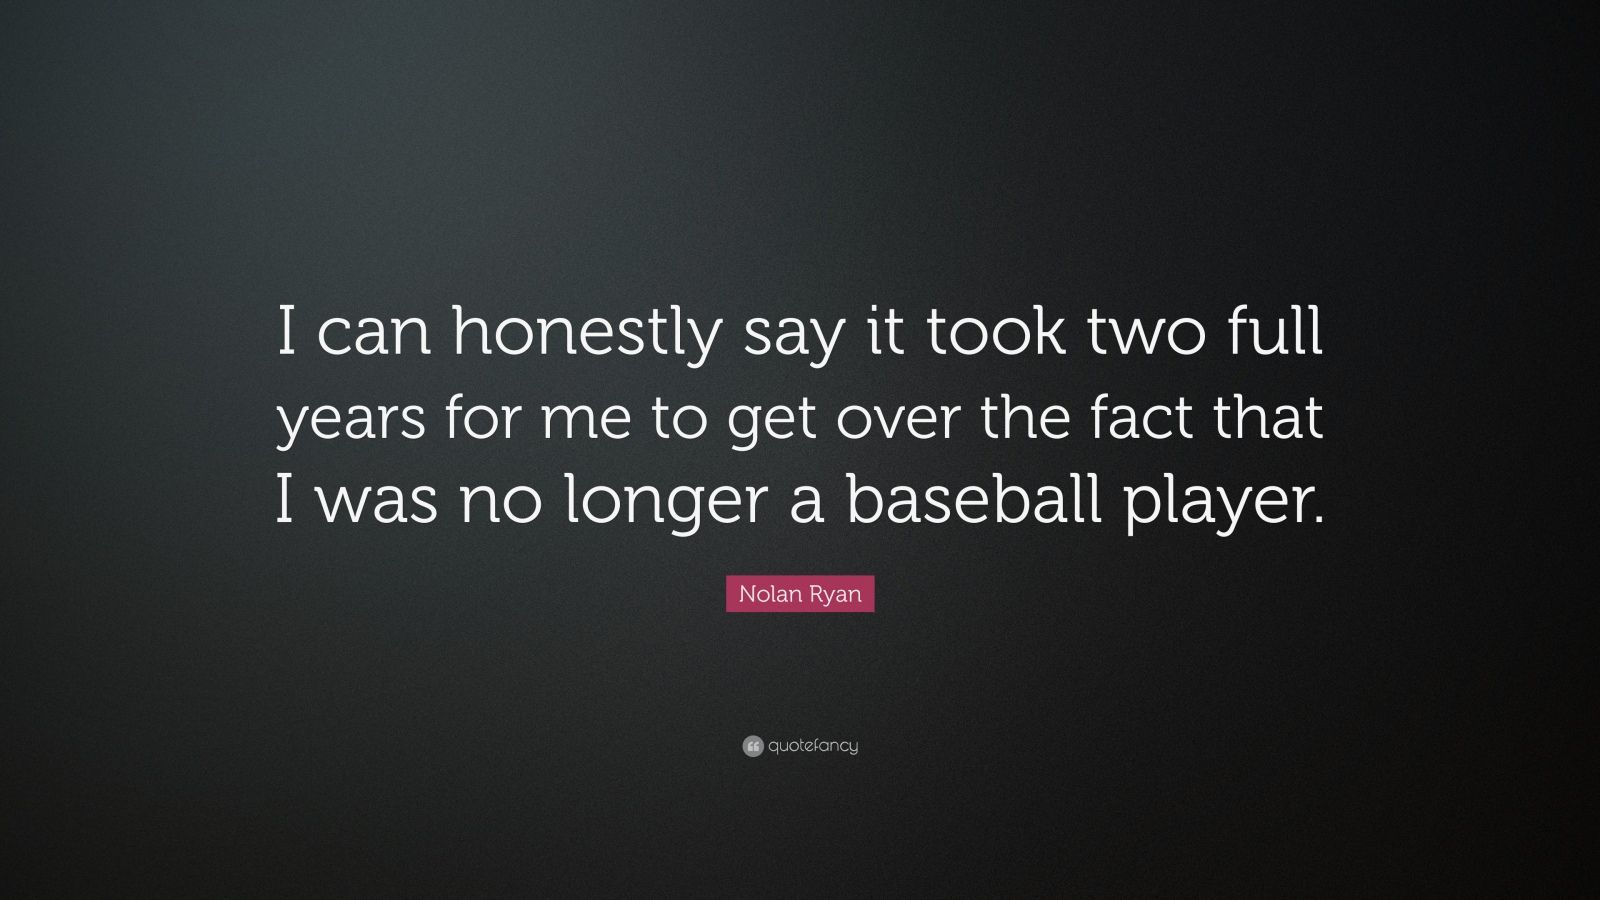 Nolan Ryan Quote: “I can honestly say it took two full years for me to ...